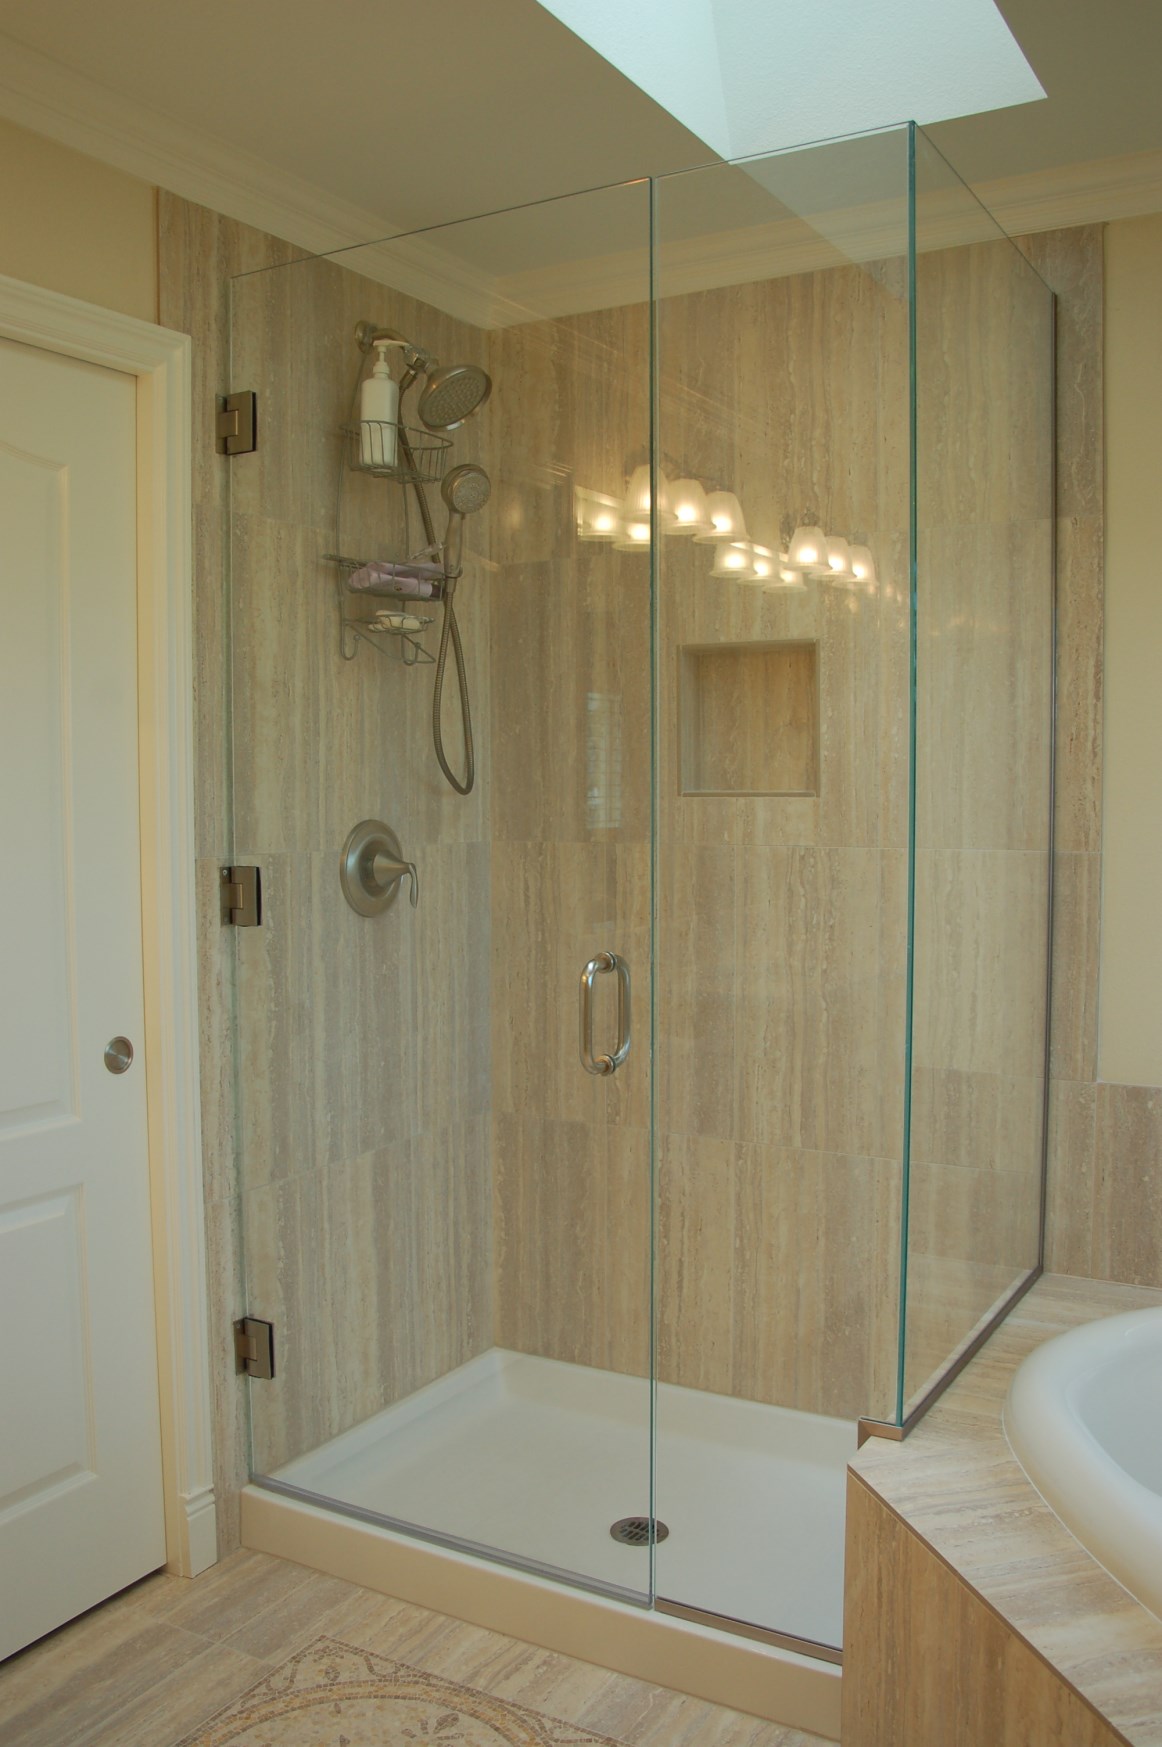 Why Are Homeowners Spending Thousands Of Dollars On Bath Remodels Rose Construction Inc